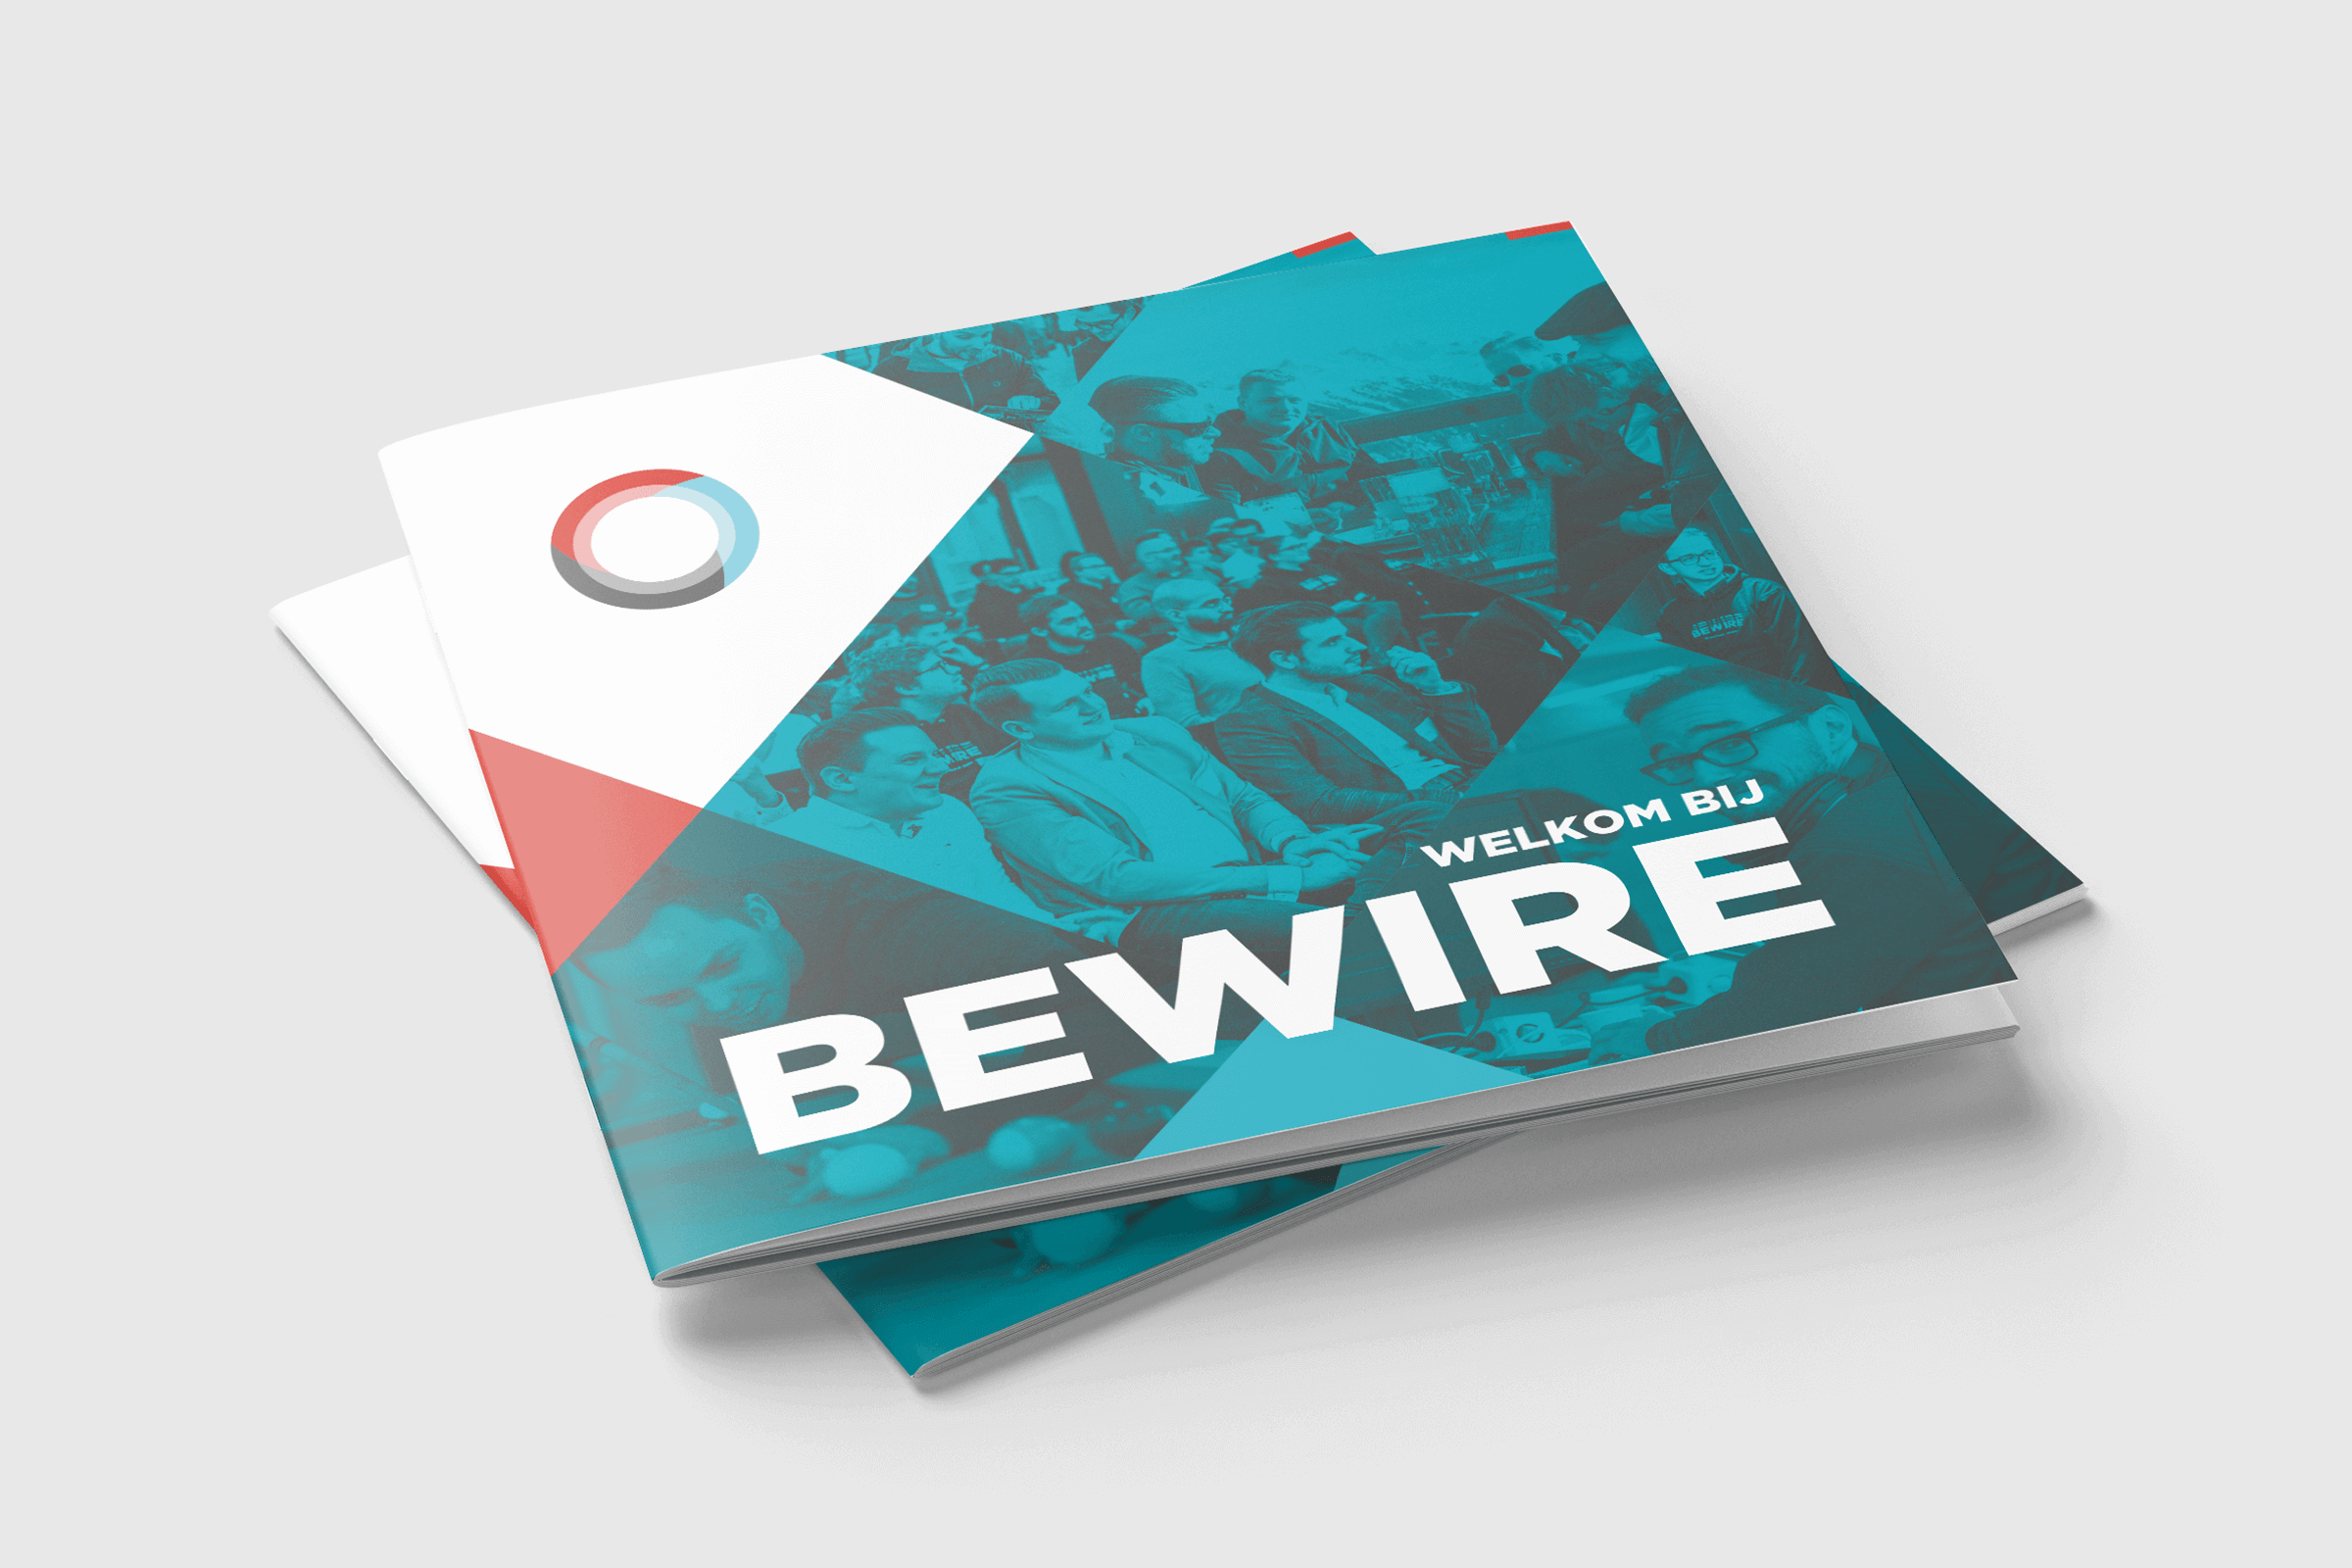 Information document about the new Bewire Office